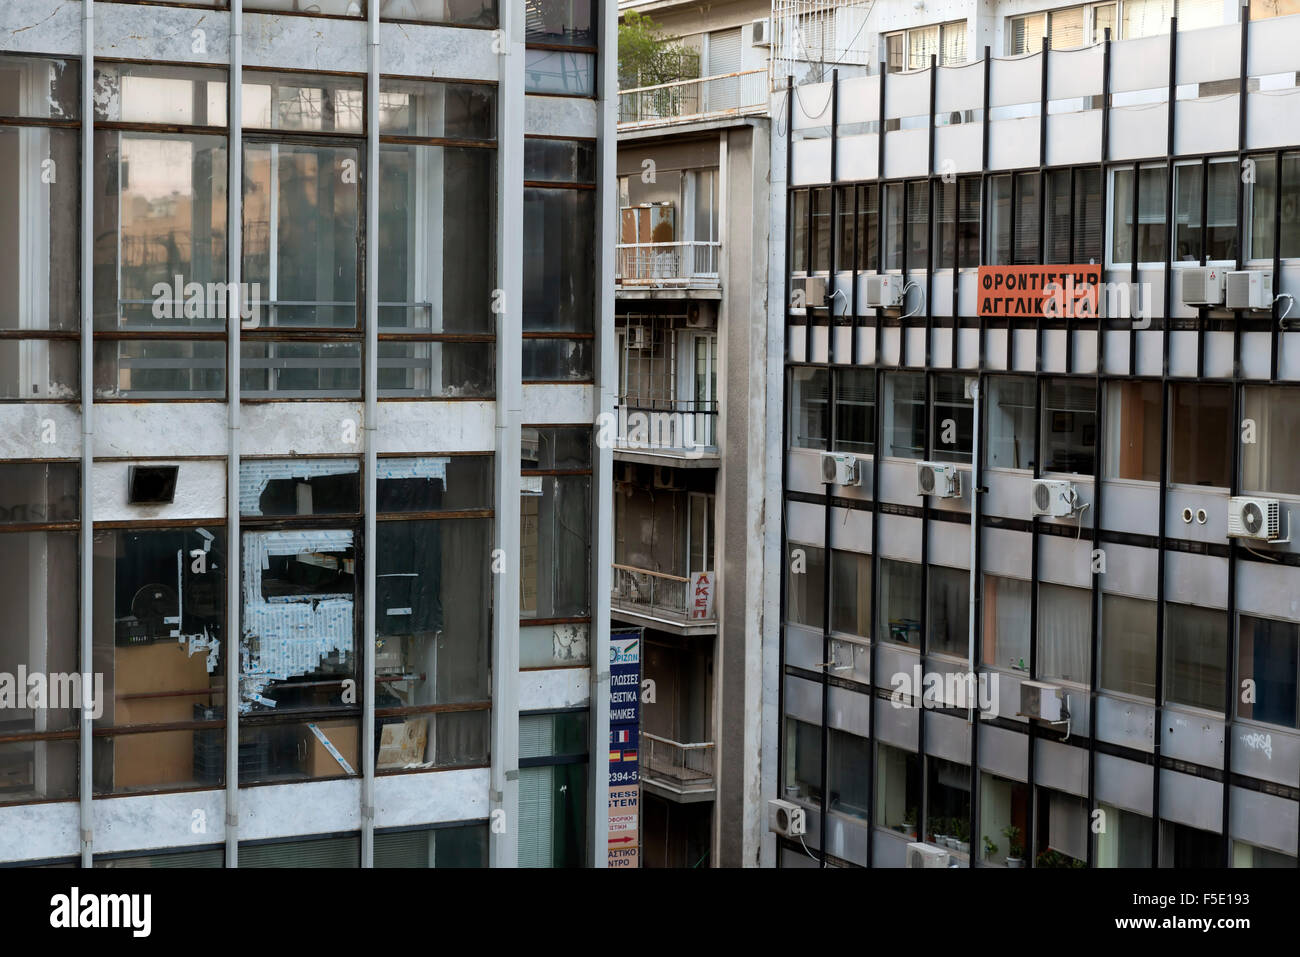 ATHENS, GREECE - OCTOBER 31, 2015: Office buildings in the center of Athens abandoned by the economic crisis Stock Photo